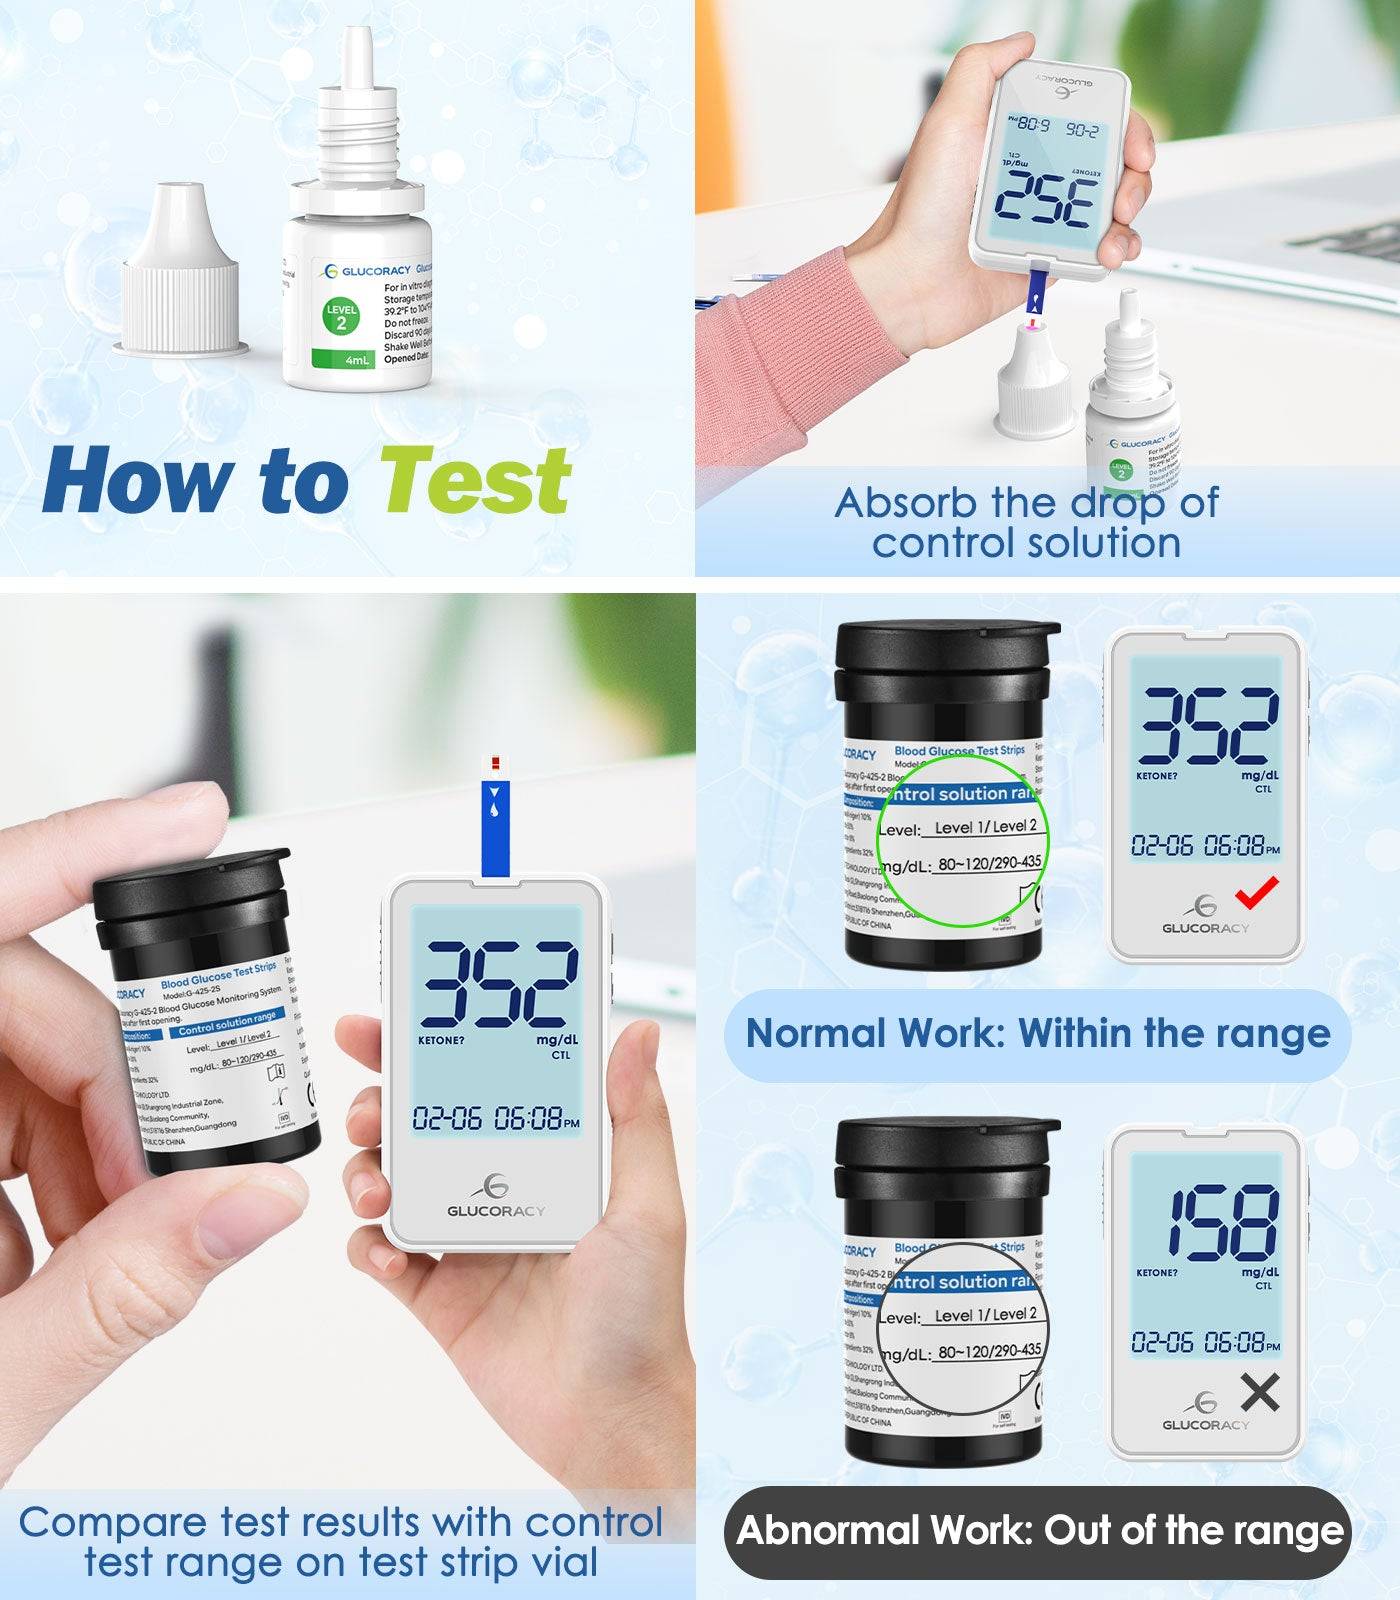 Glucoracy g-425-2 Glucose Control Solution how to test